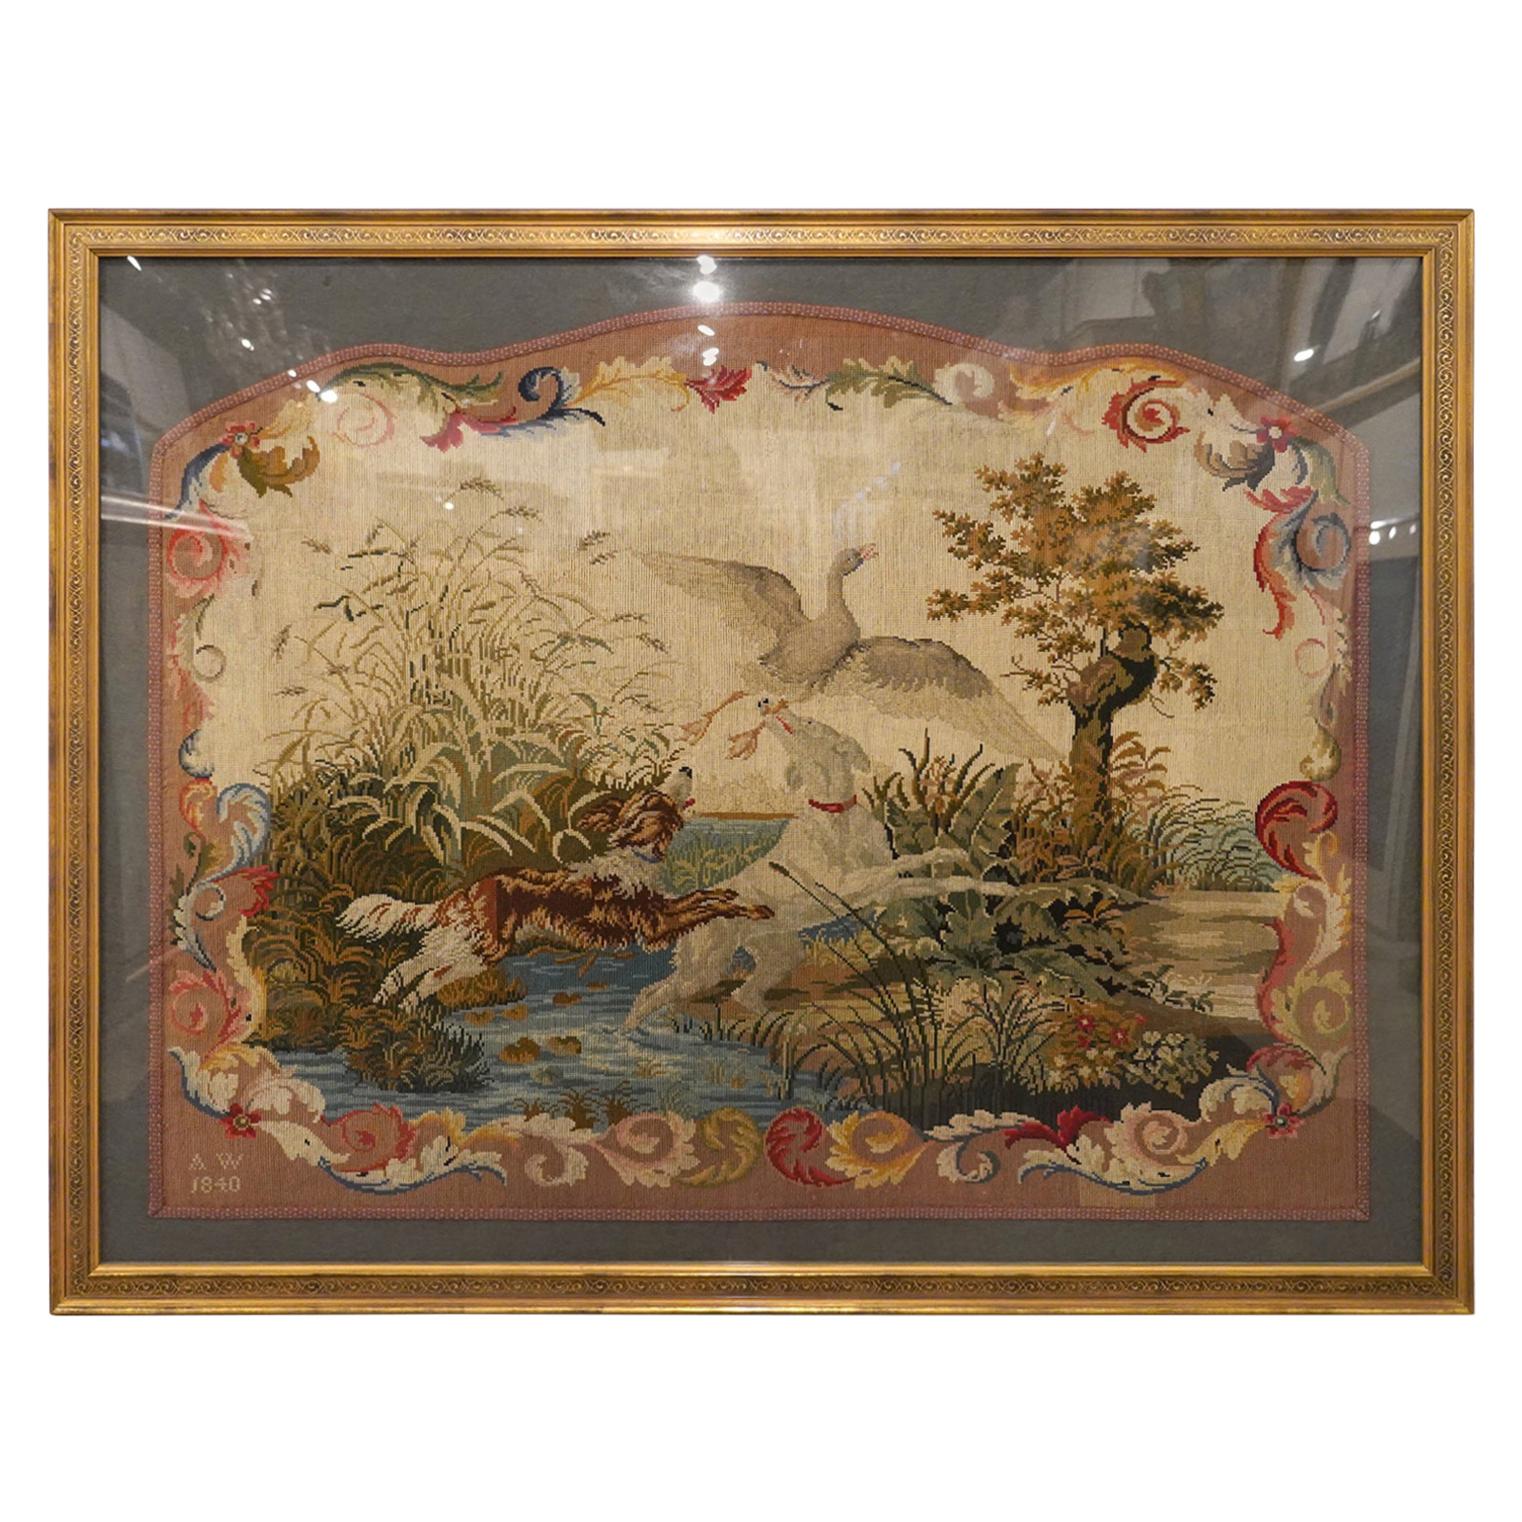 Large Early English Framed Needlepoint Depicting Hunting Scene with Dogs, 1840